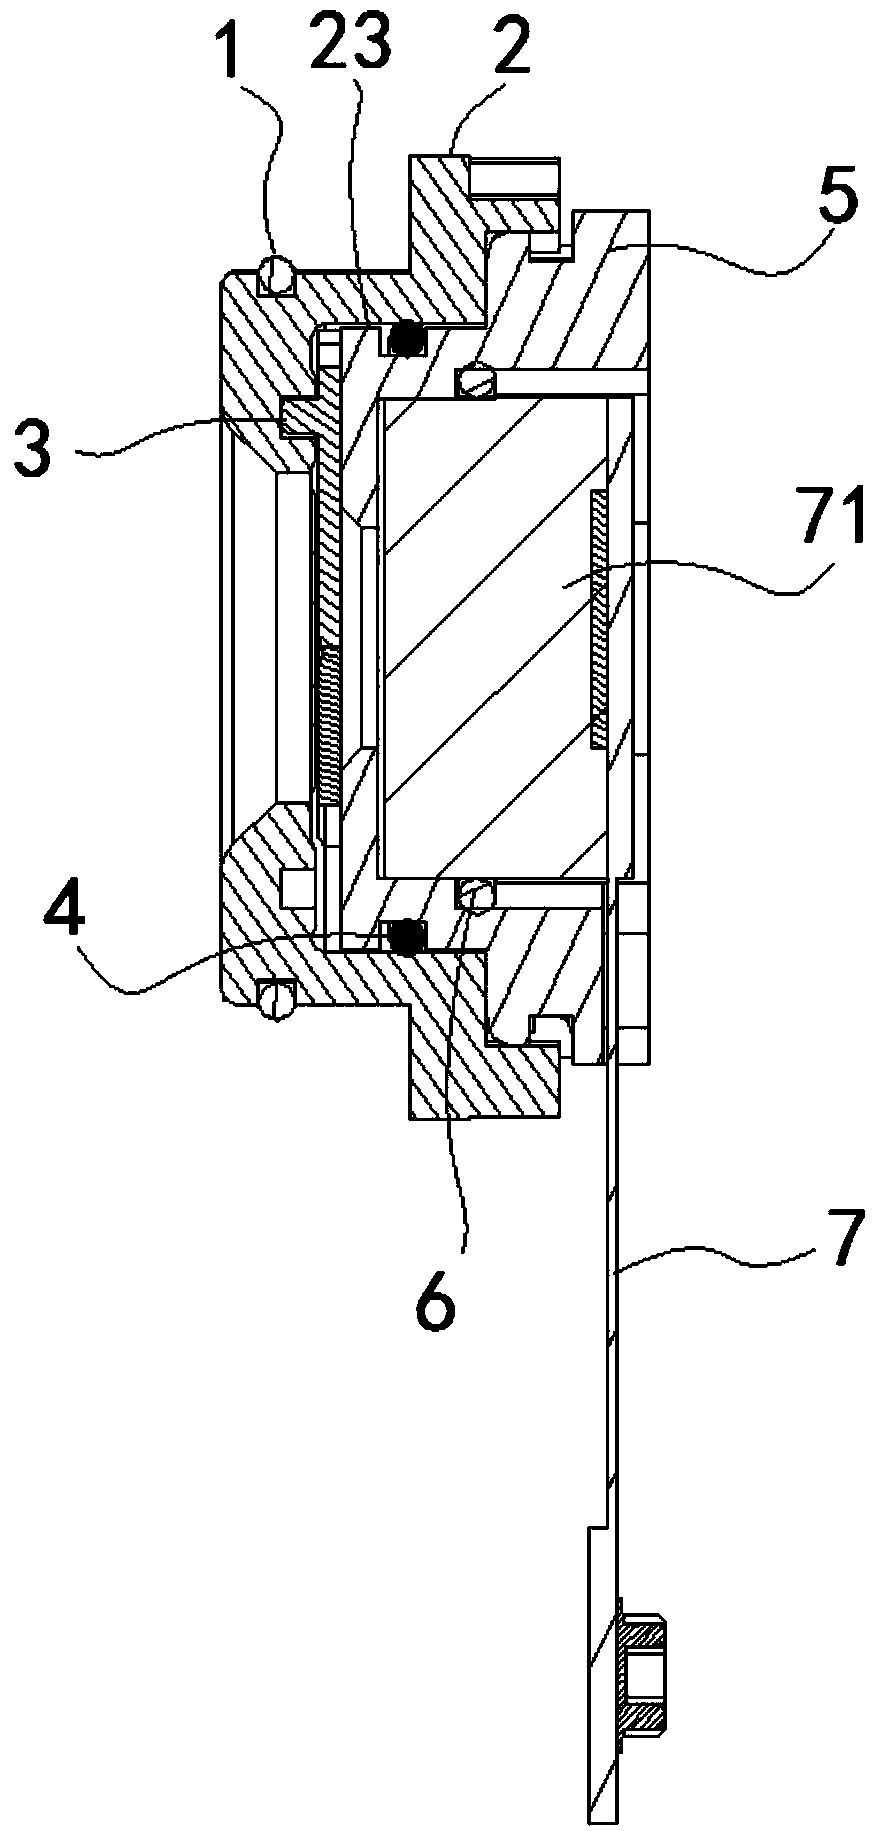 Head-mounted display equipment, camera module group, and lens shielding module for camera lens group